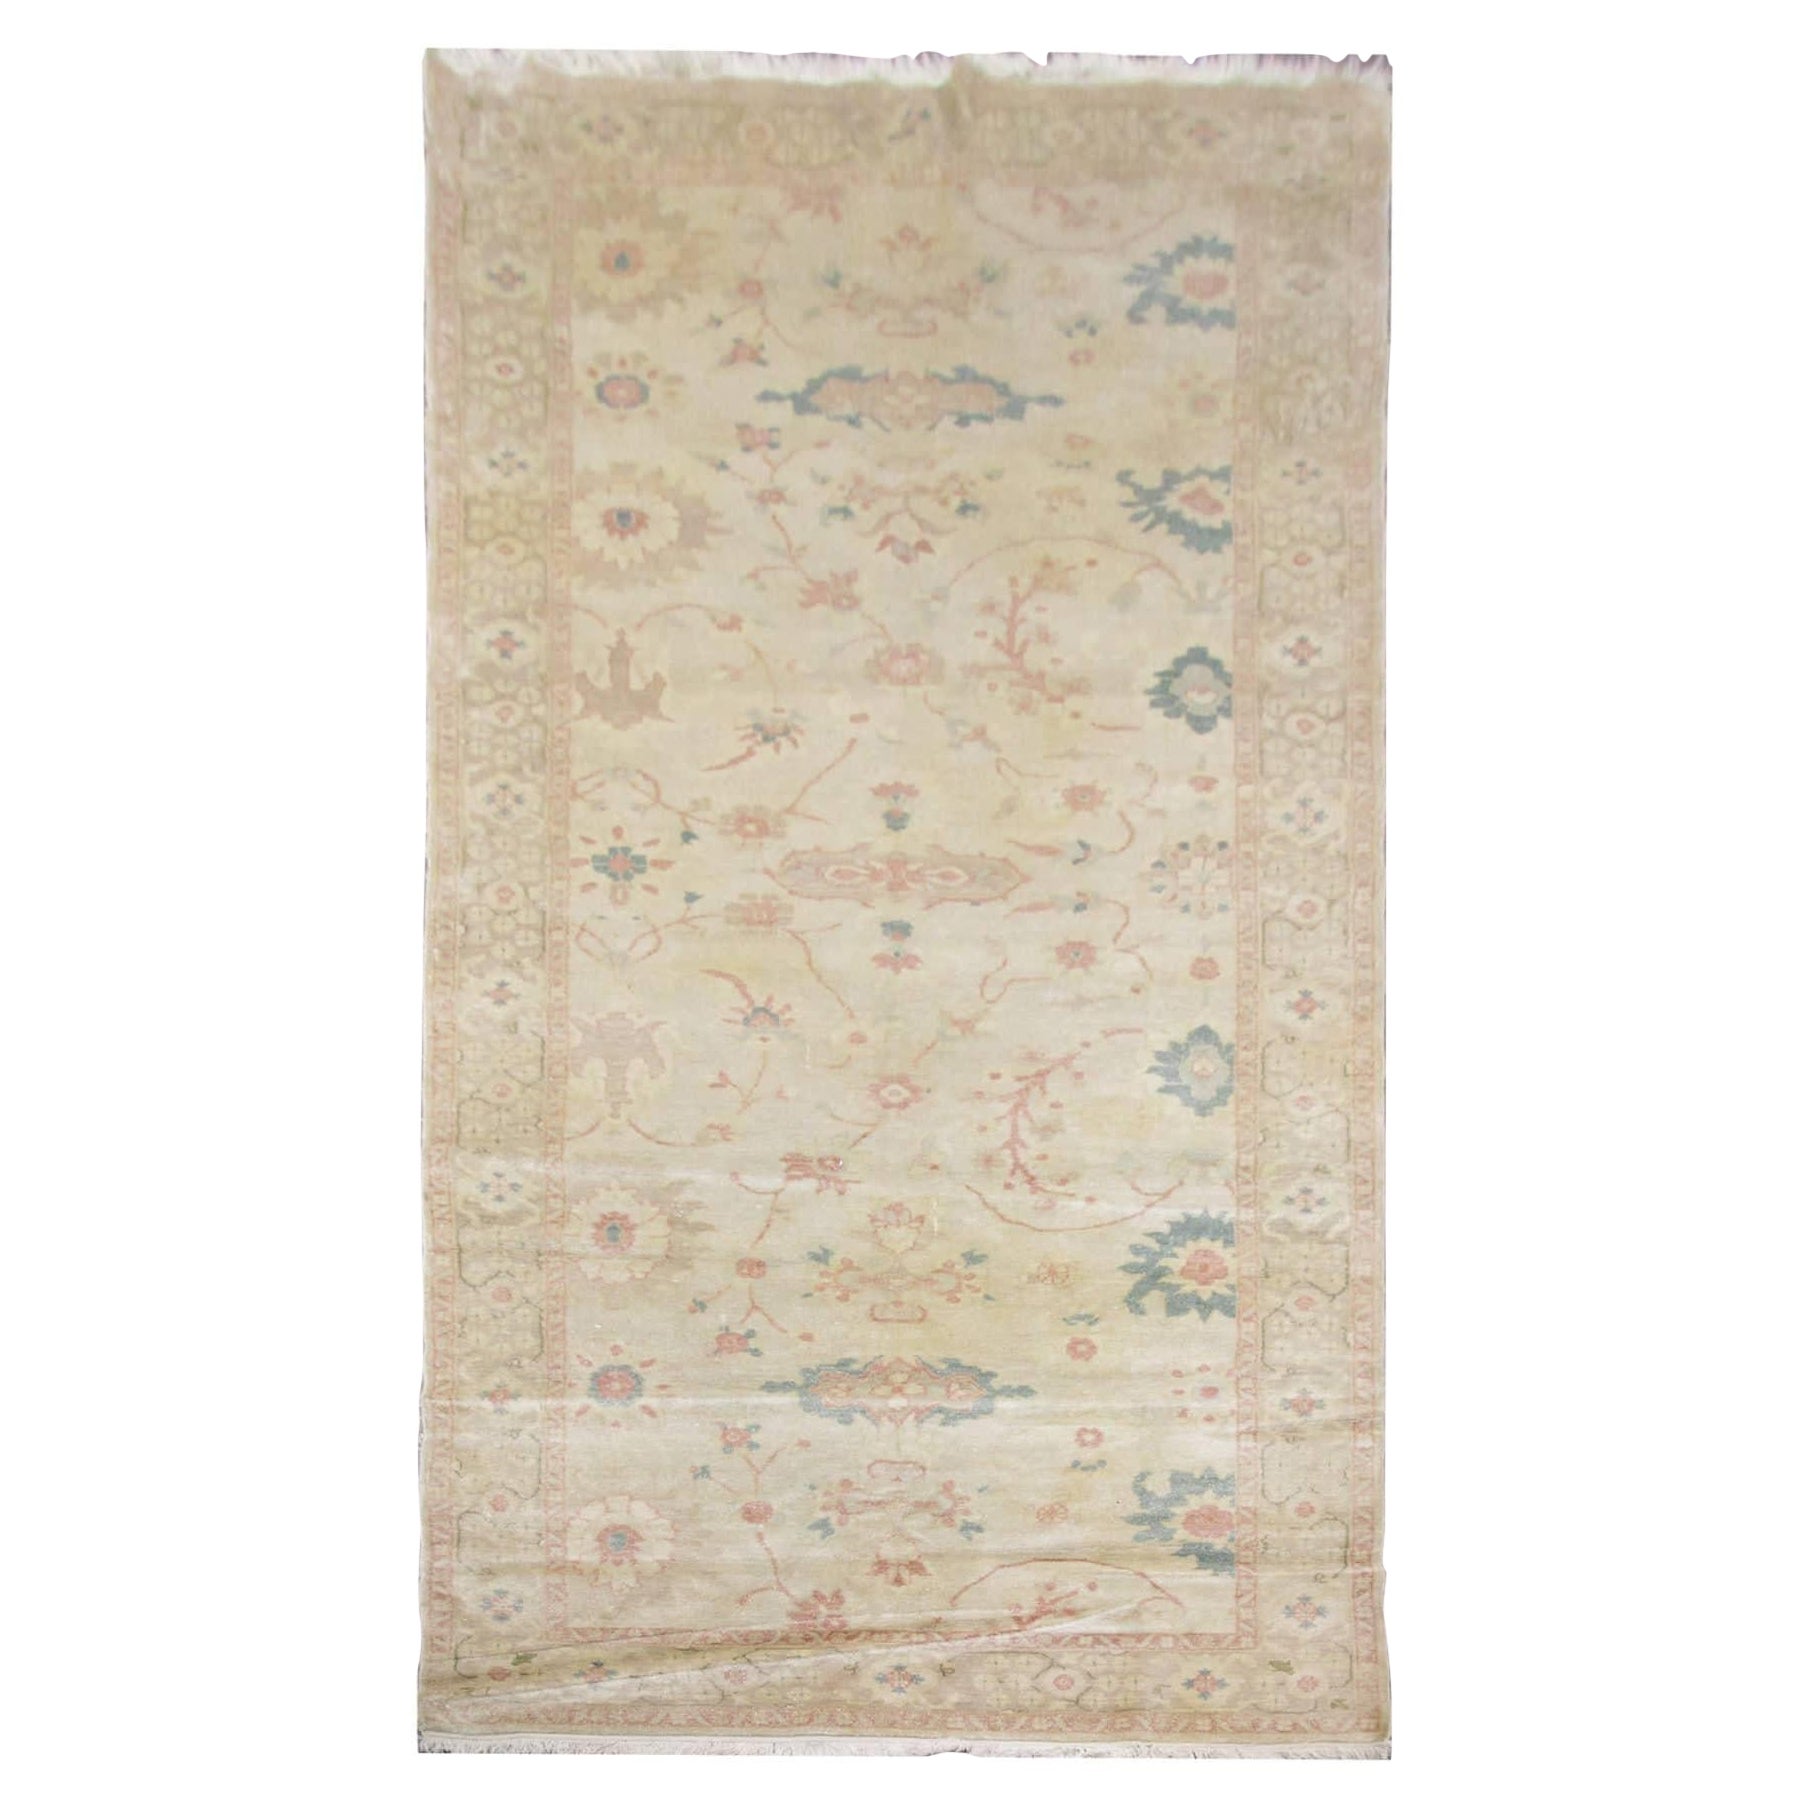 High Quality Egeption Ziegler Carpet Handmade Tribal Rustic Wool Rug for Sale For Sale